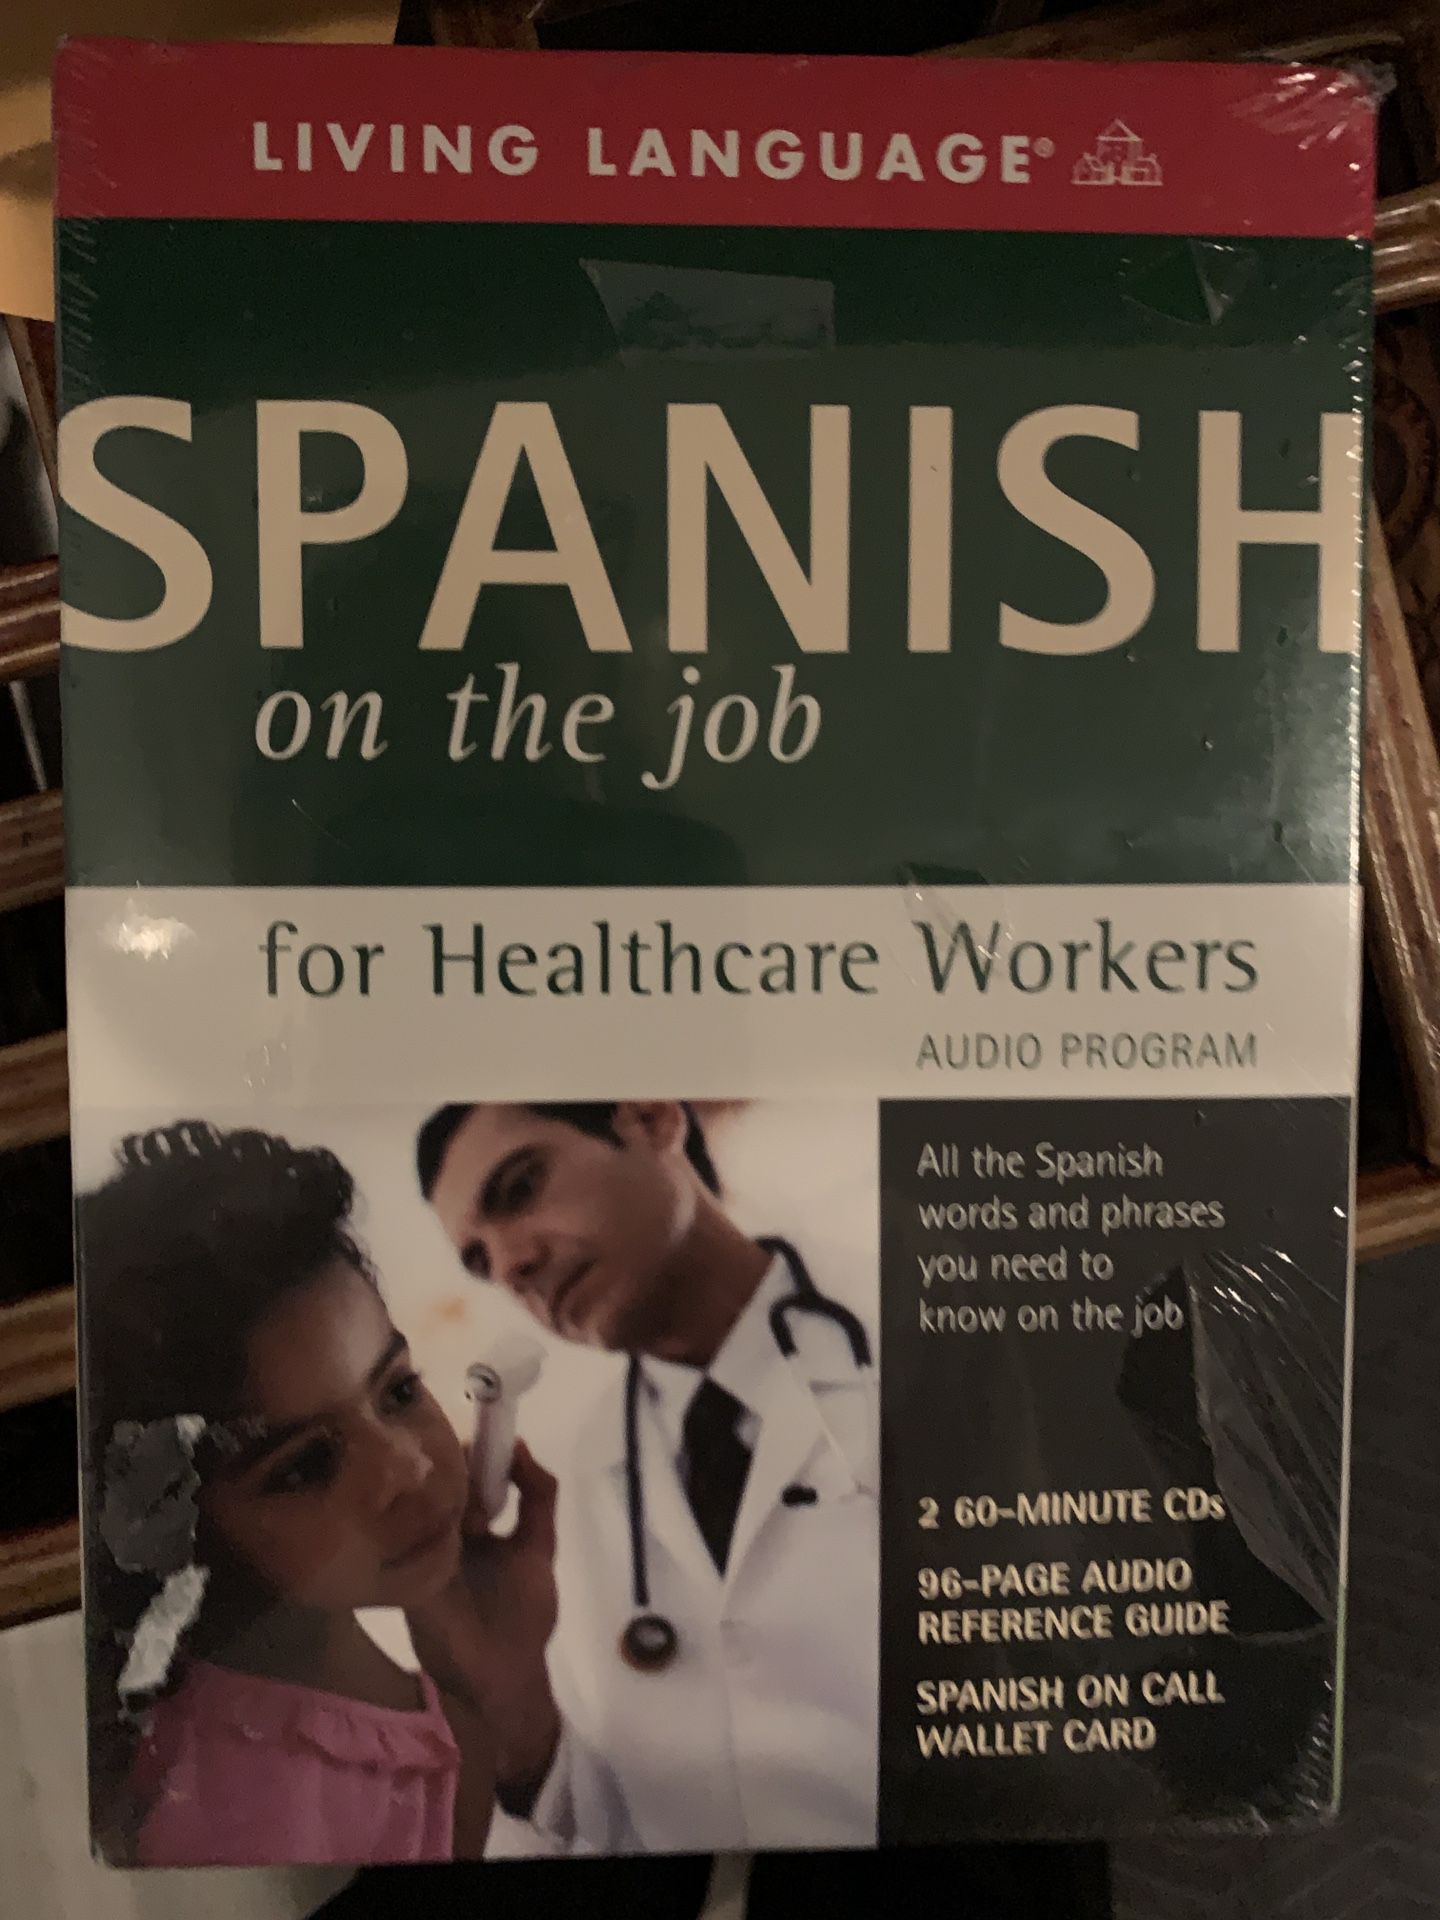 Living language “Spanish” for health care workers